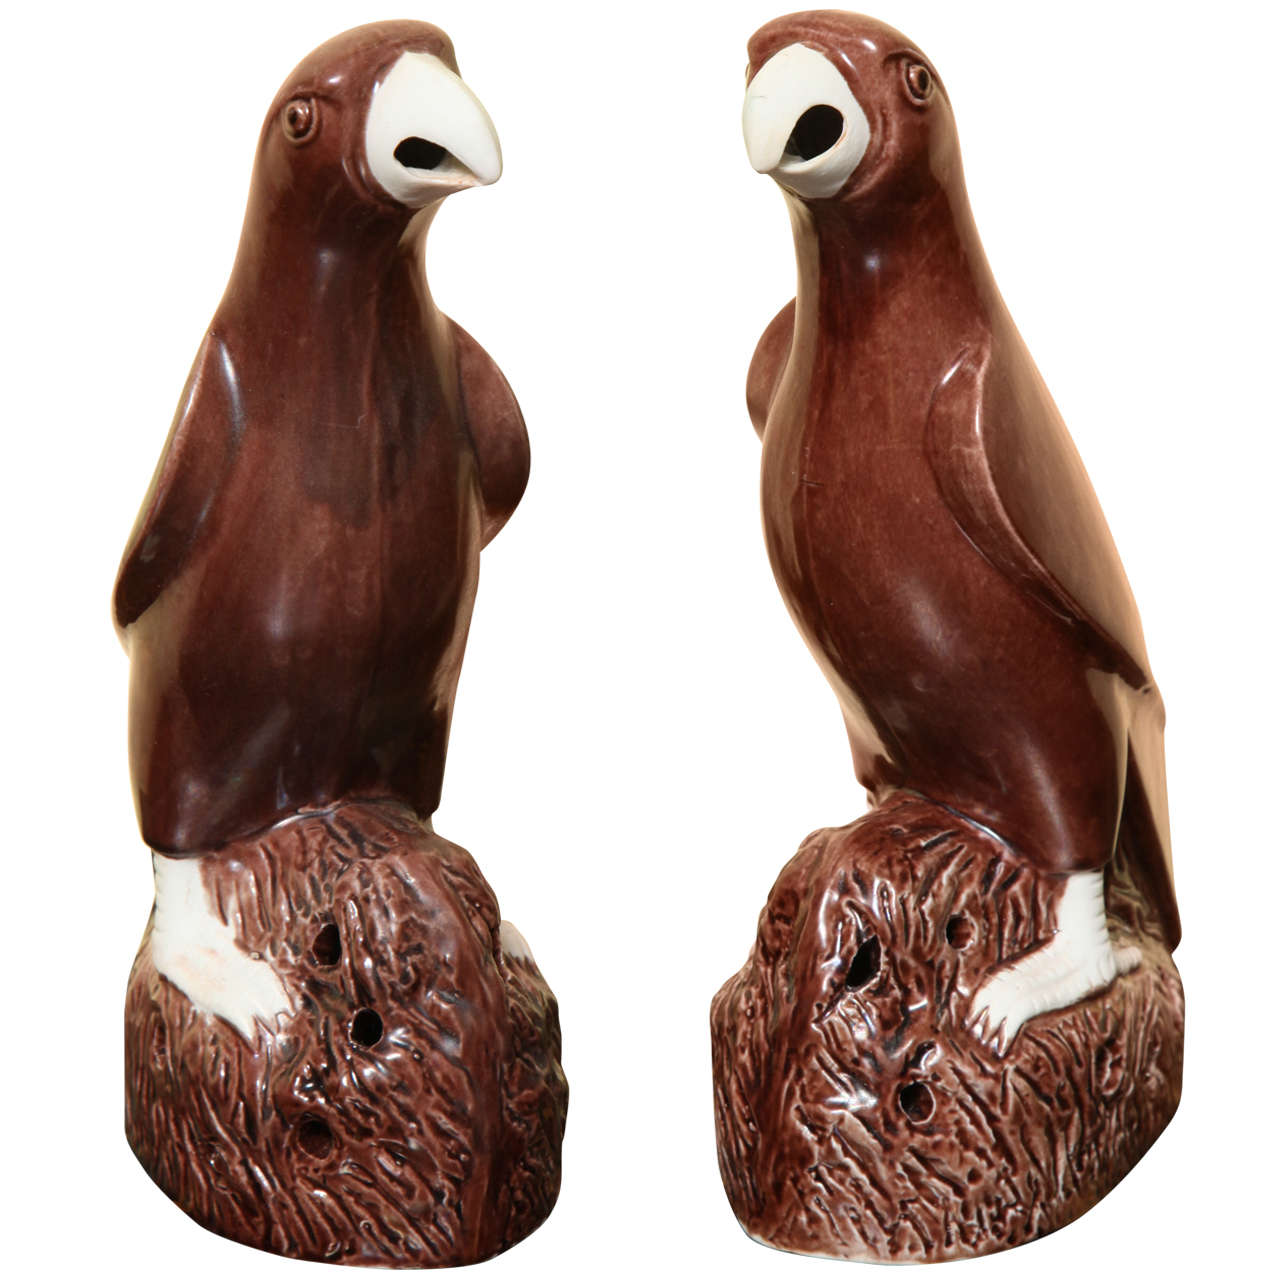 Pair of Chinese Export Brown Glazed Porcelain Parrots, circa 1850 For Sale